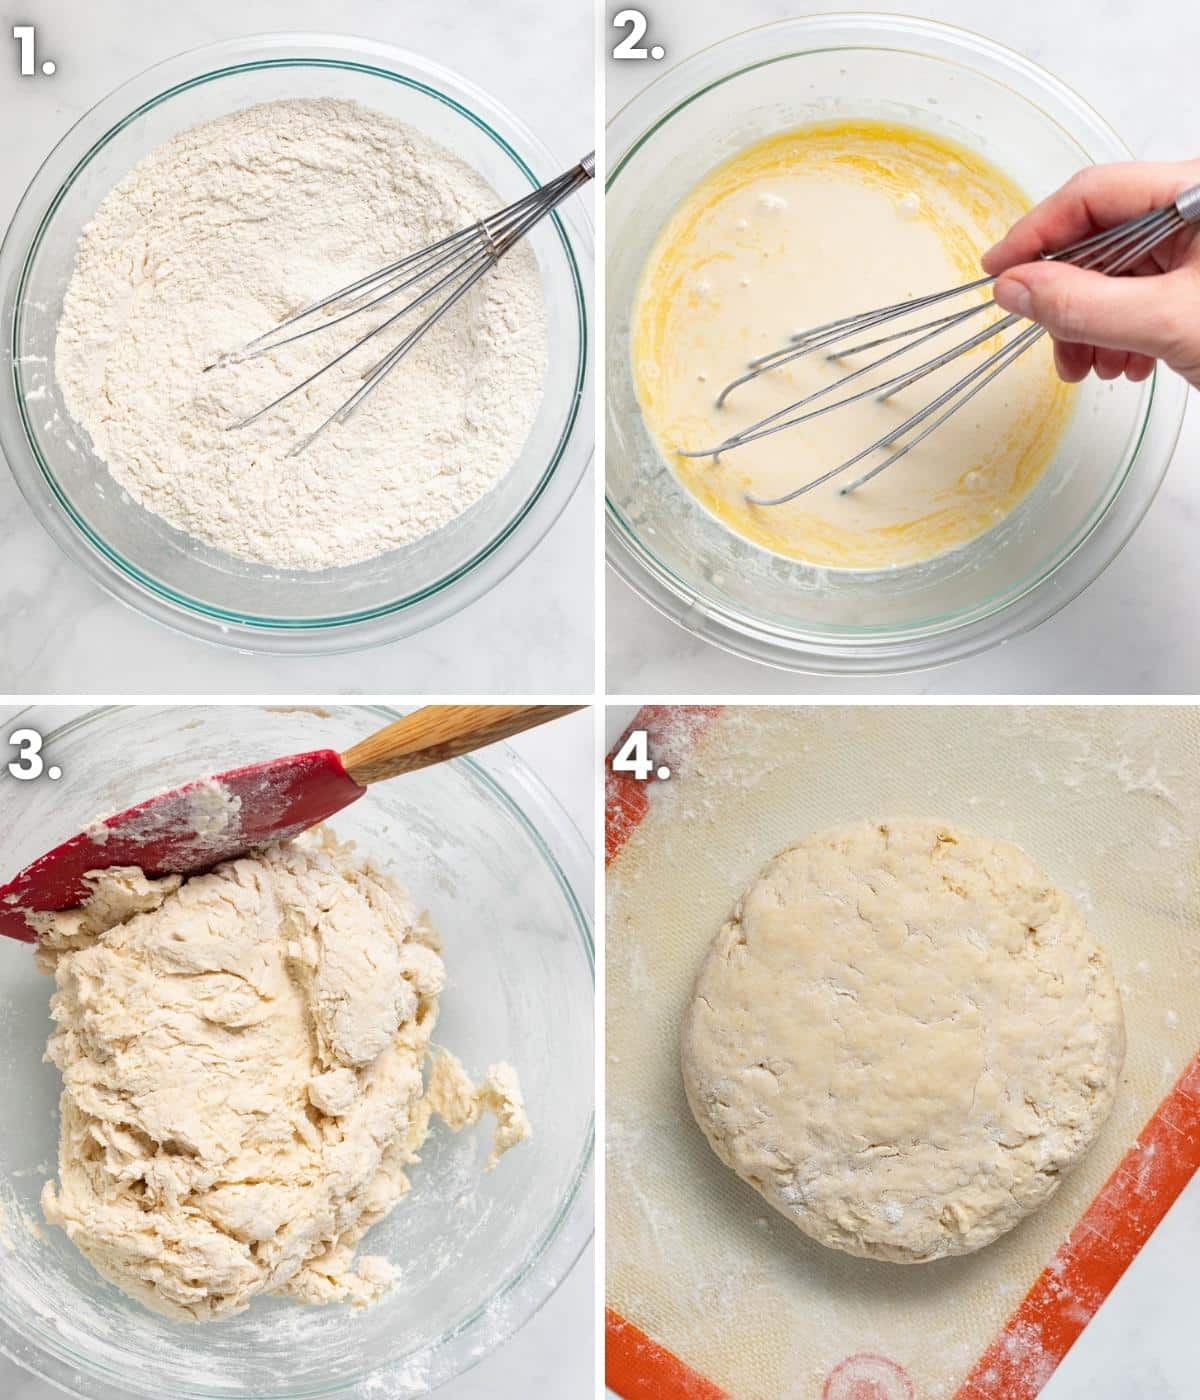 process shots of how to make vegan soda bread as per the written instructions